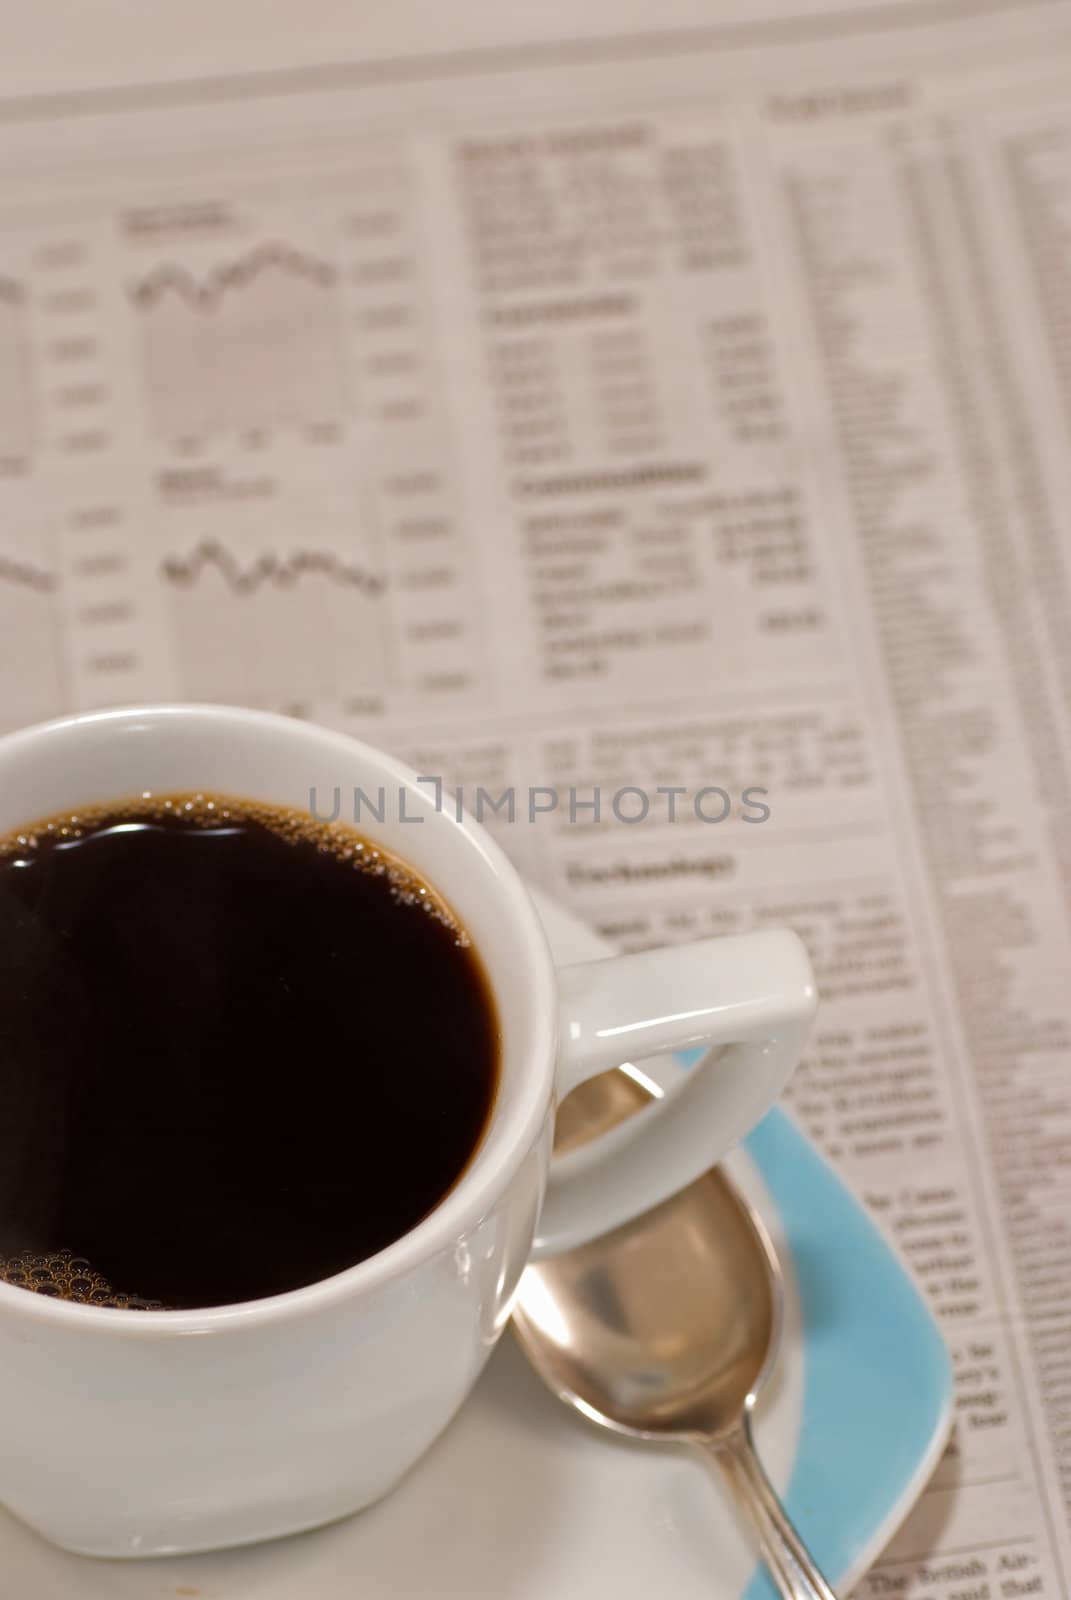 A hot early morning coffee while checking the financial news